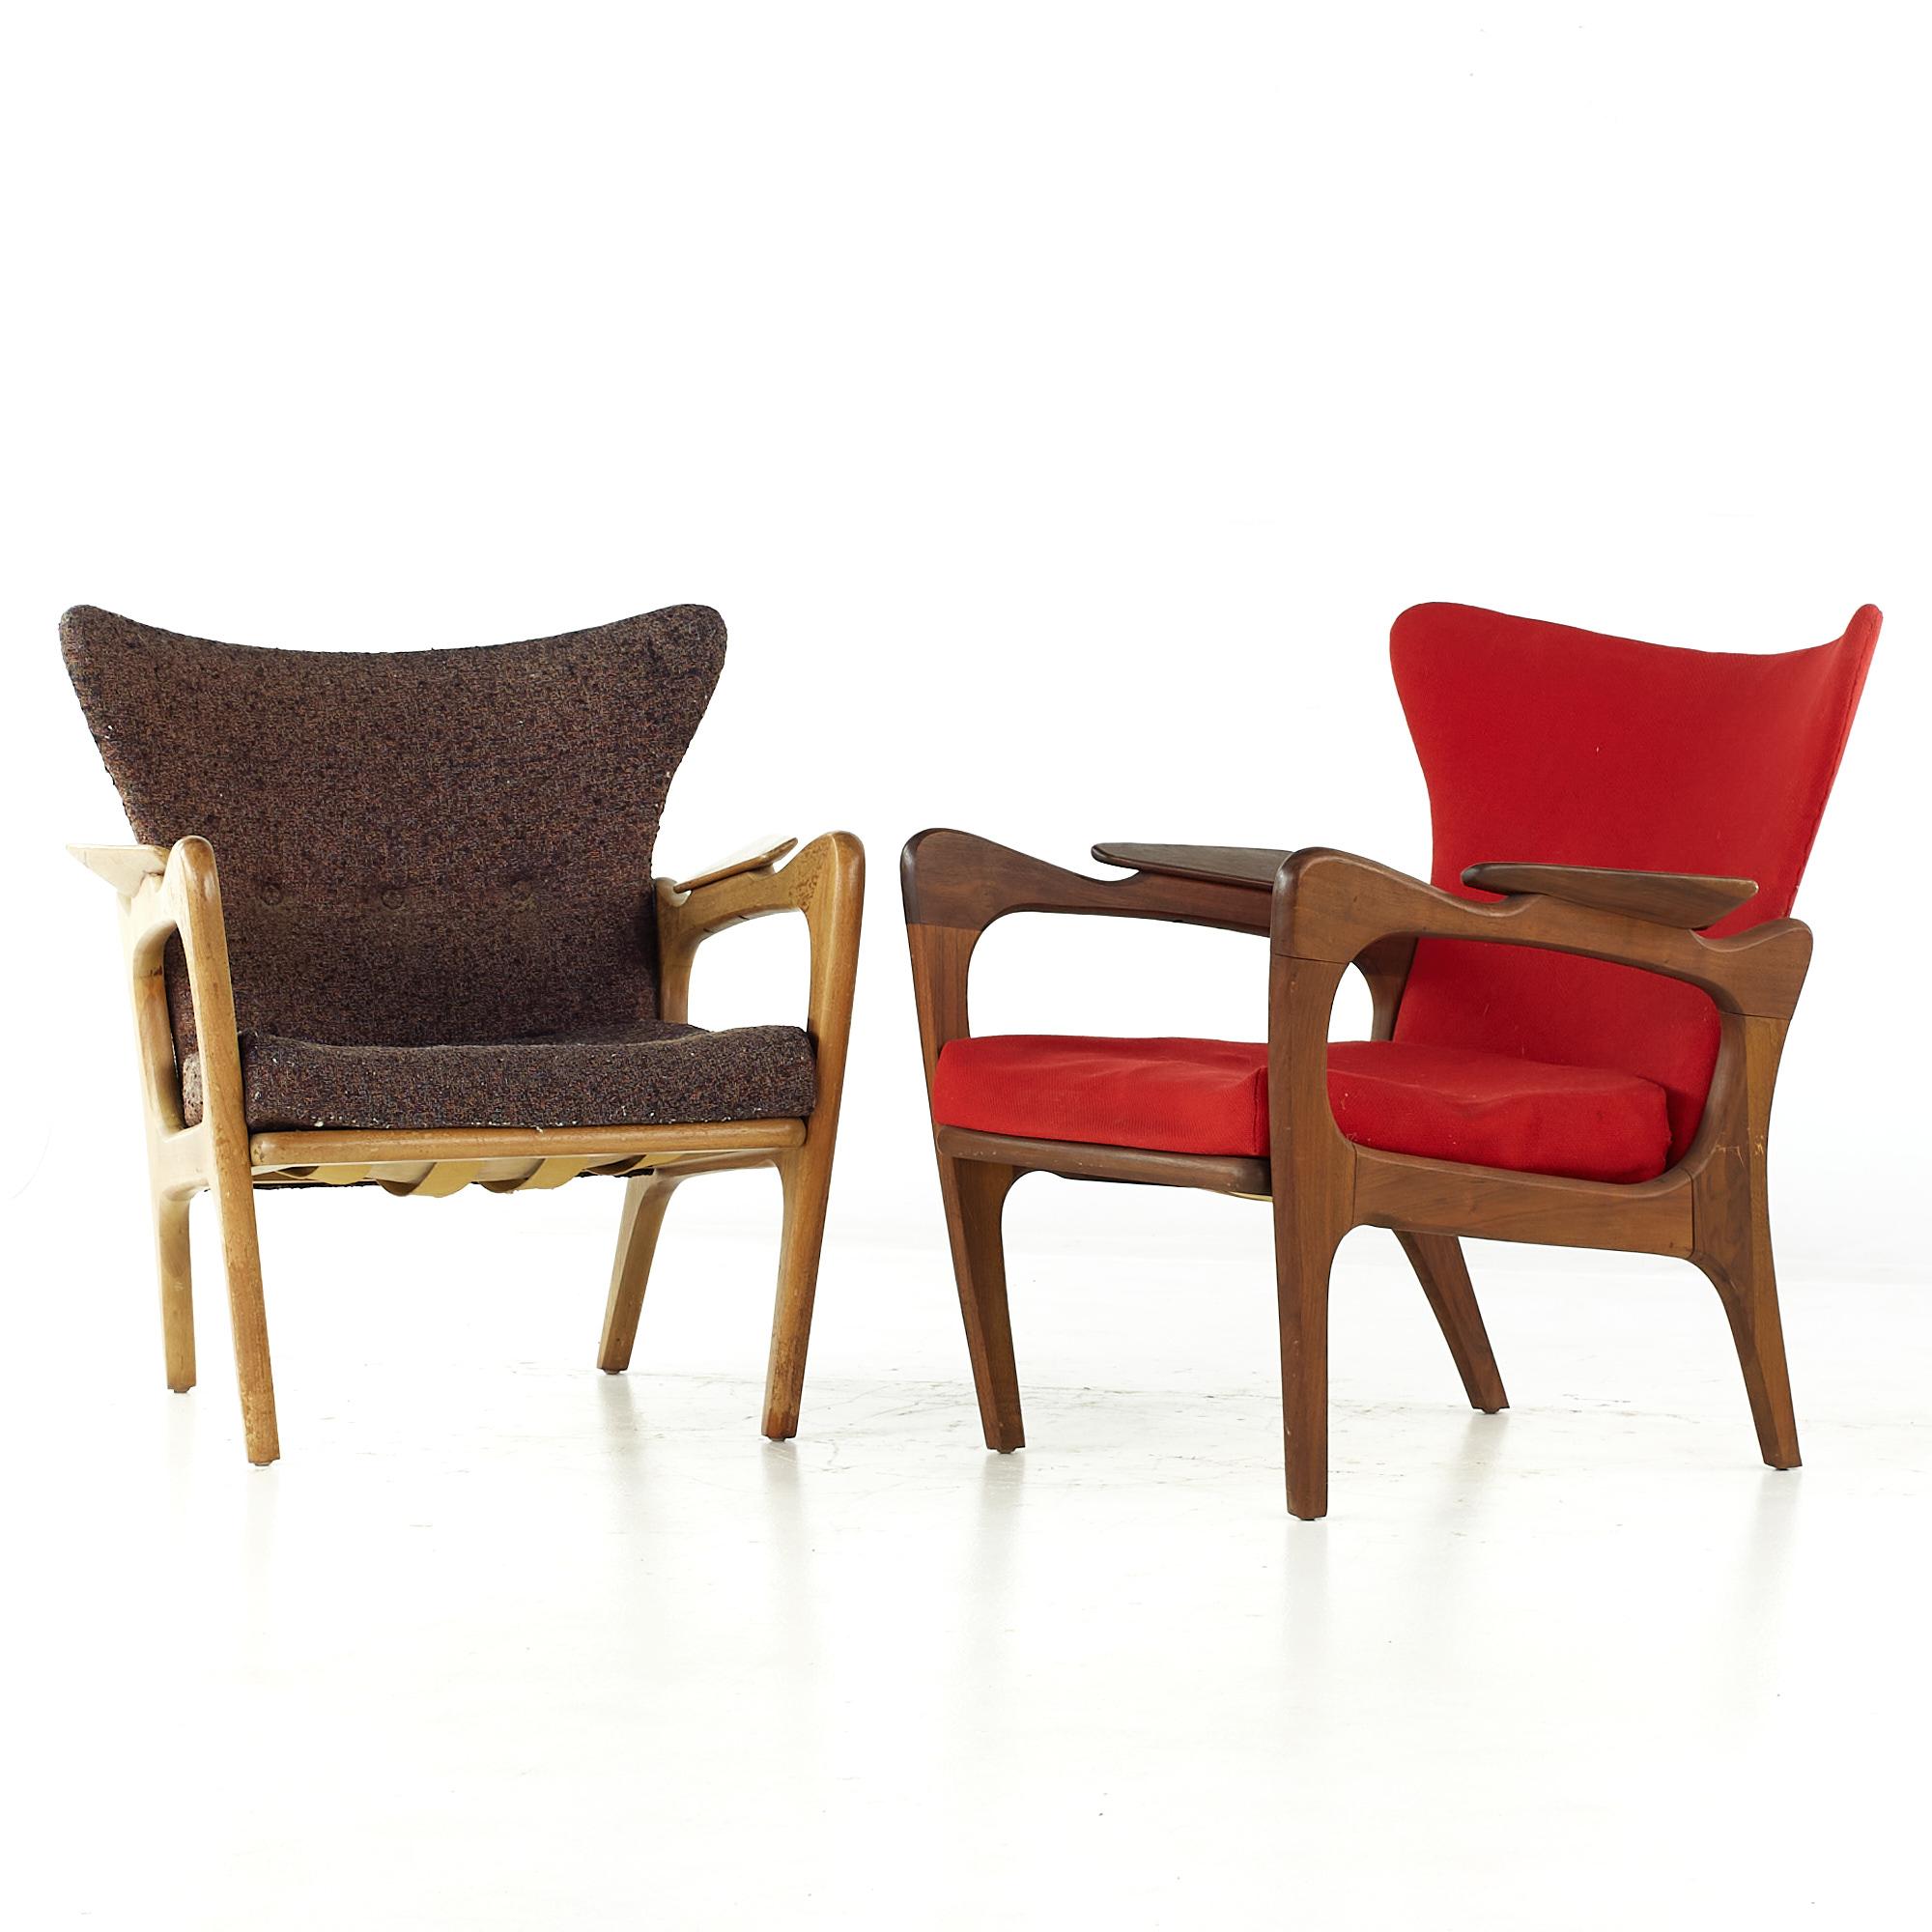 Mid-Century Modern Adrian Pearsall for Craft Associates Mid Century Lounge Chair - Pair For Sale